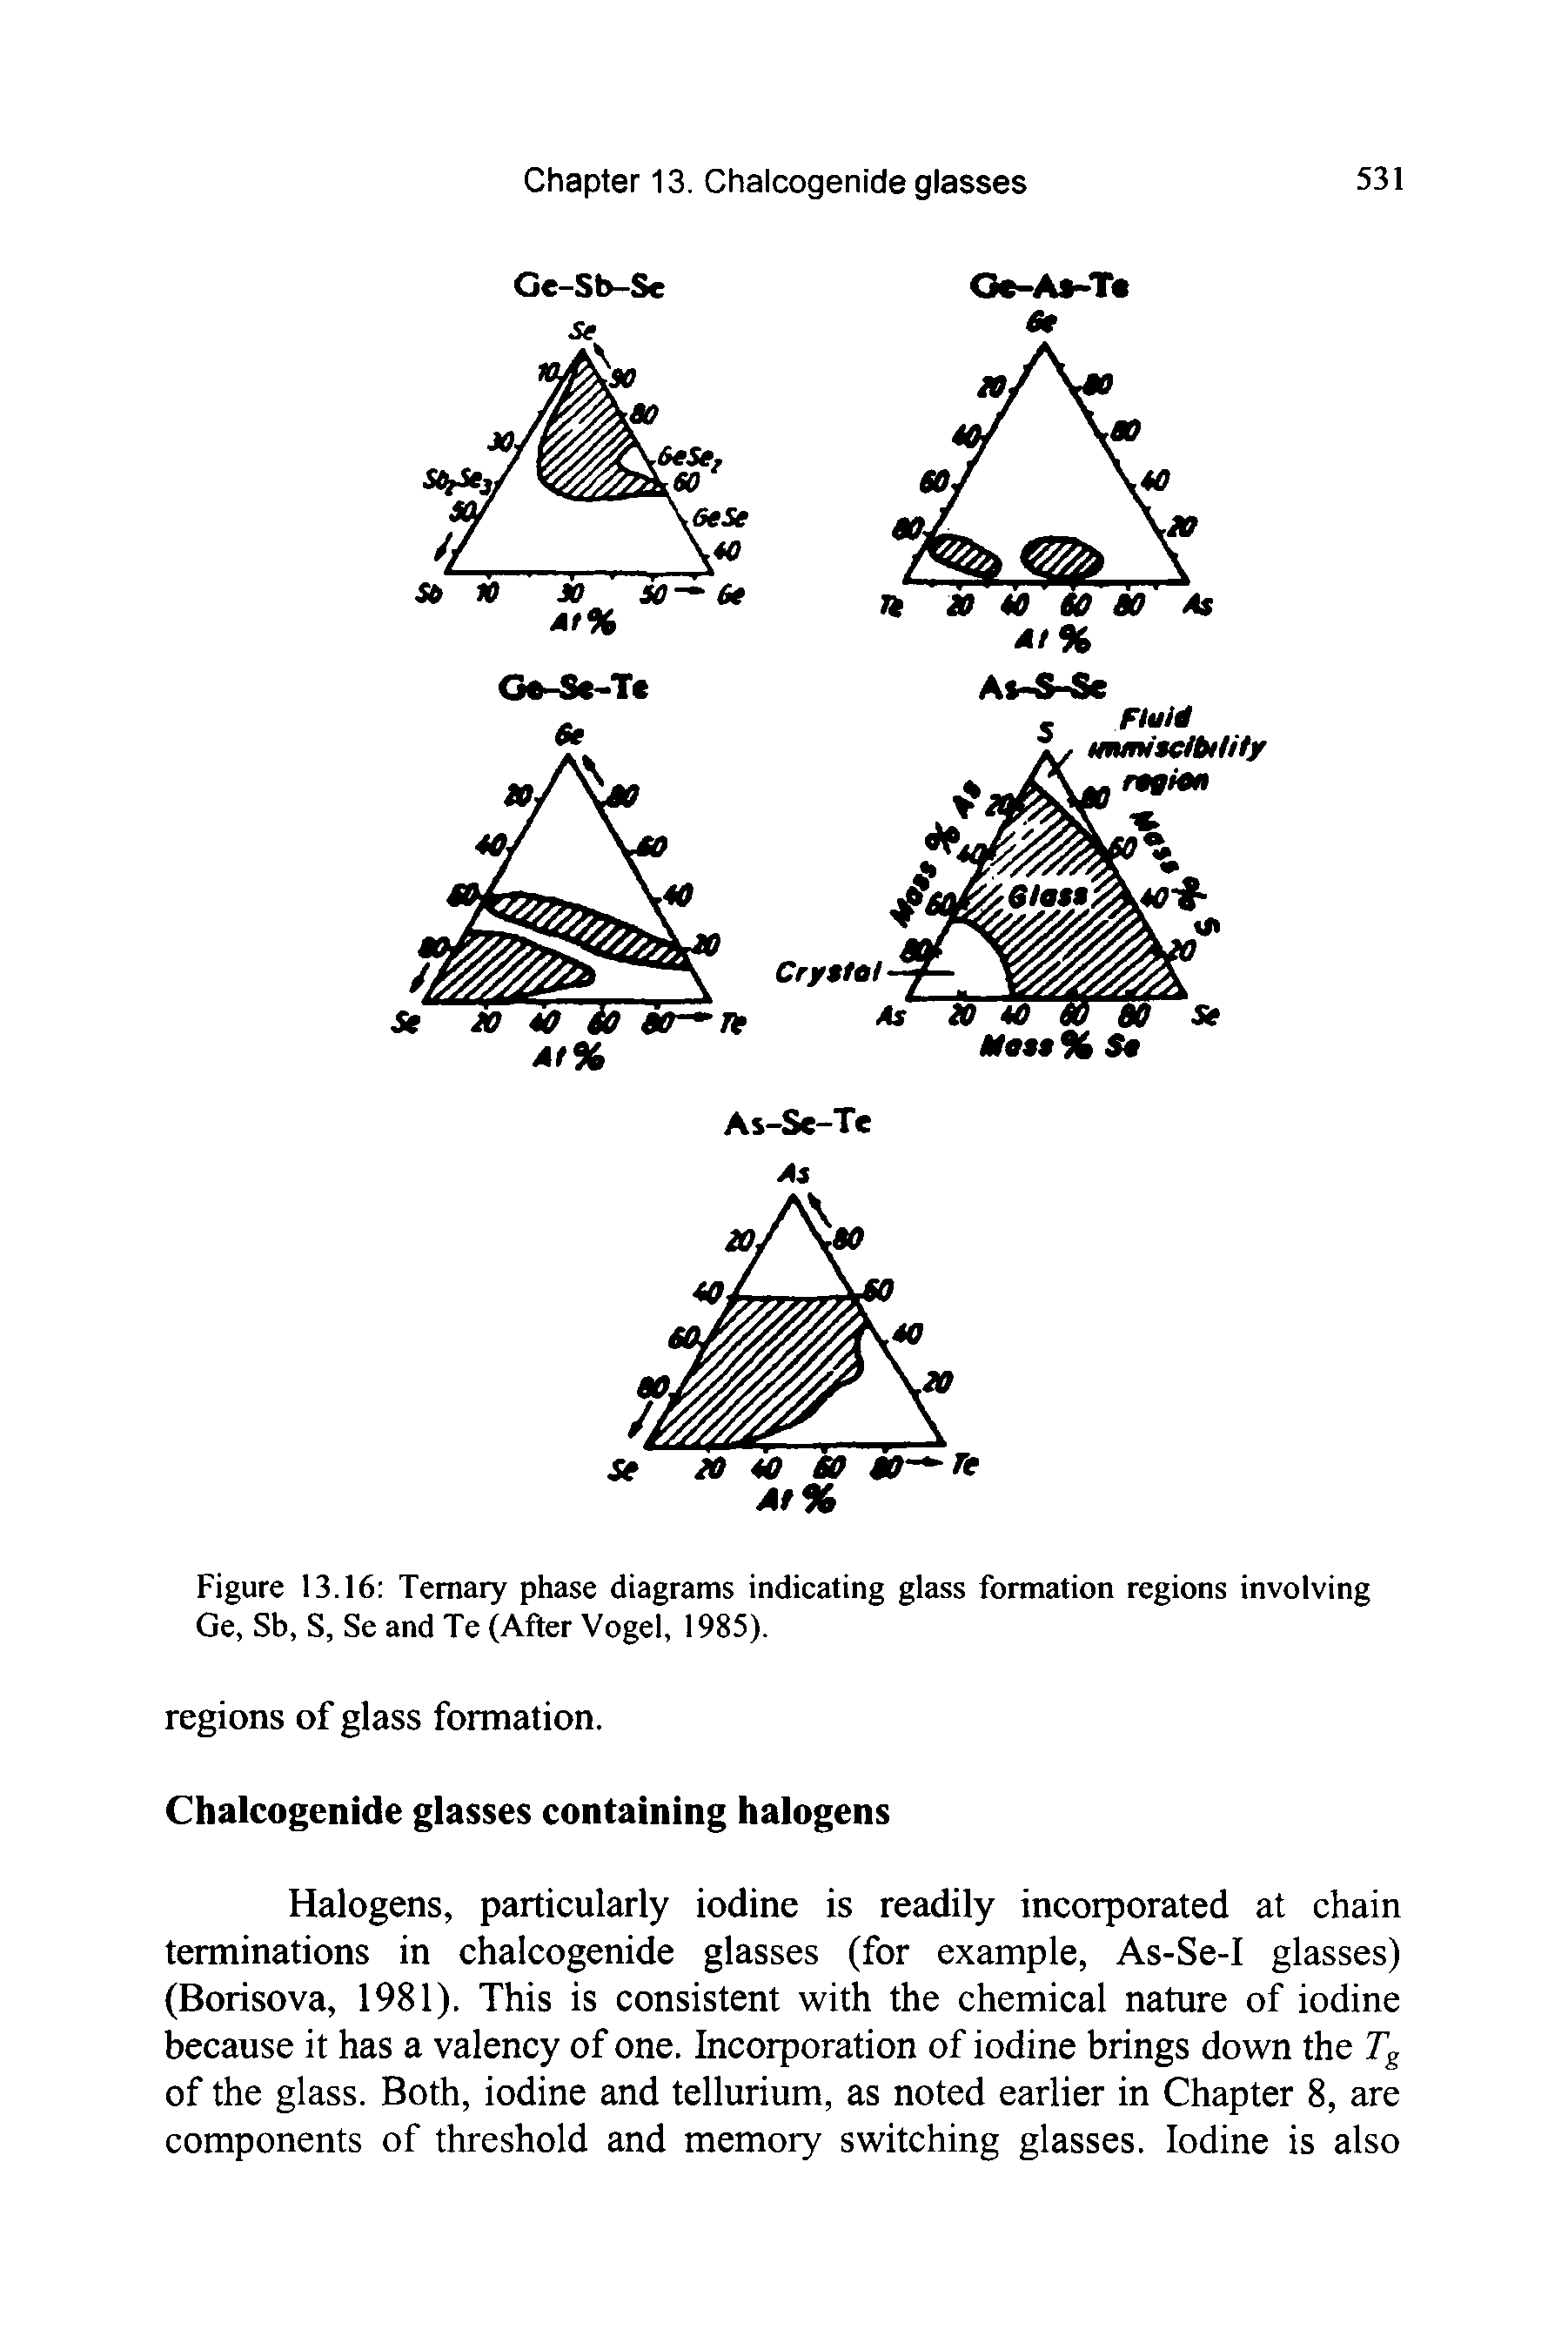 Figure 13.16 Ternary phase diagrams indicating glass formation regions involving Ge, Sb, S, Se and Te (After Vogel, 1985).